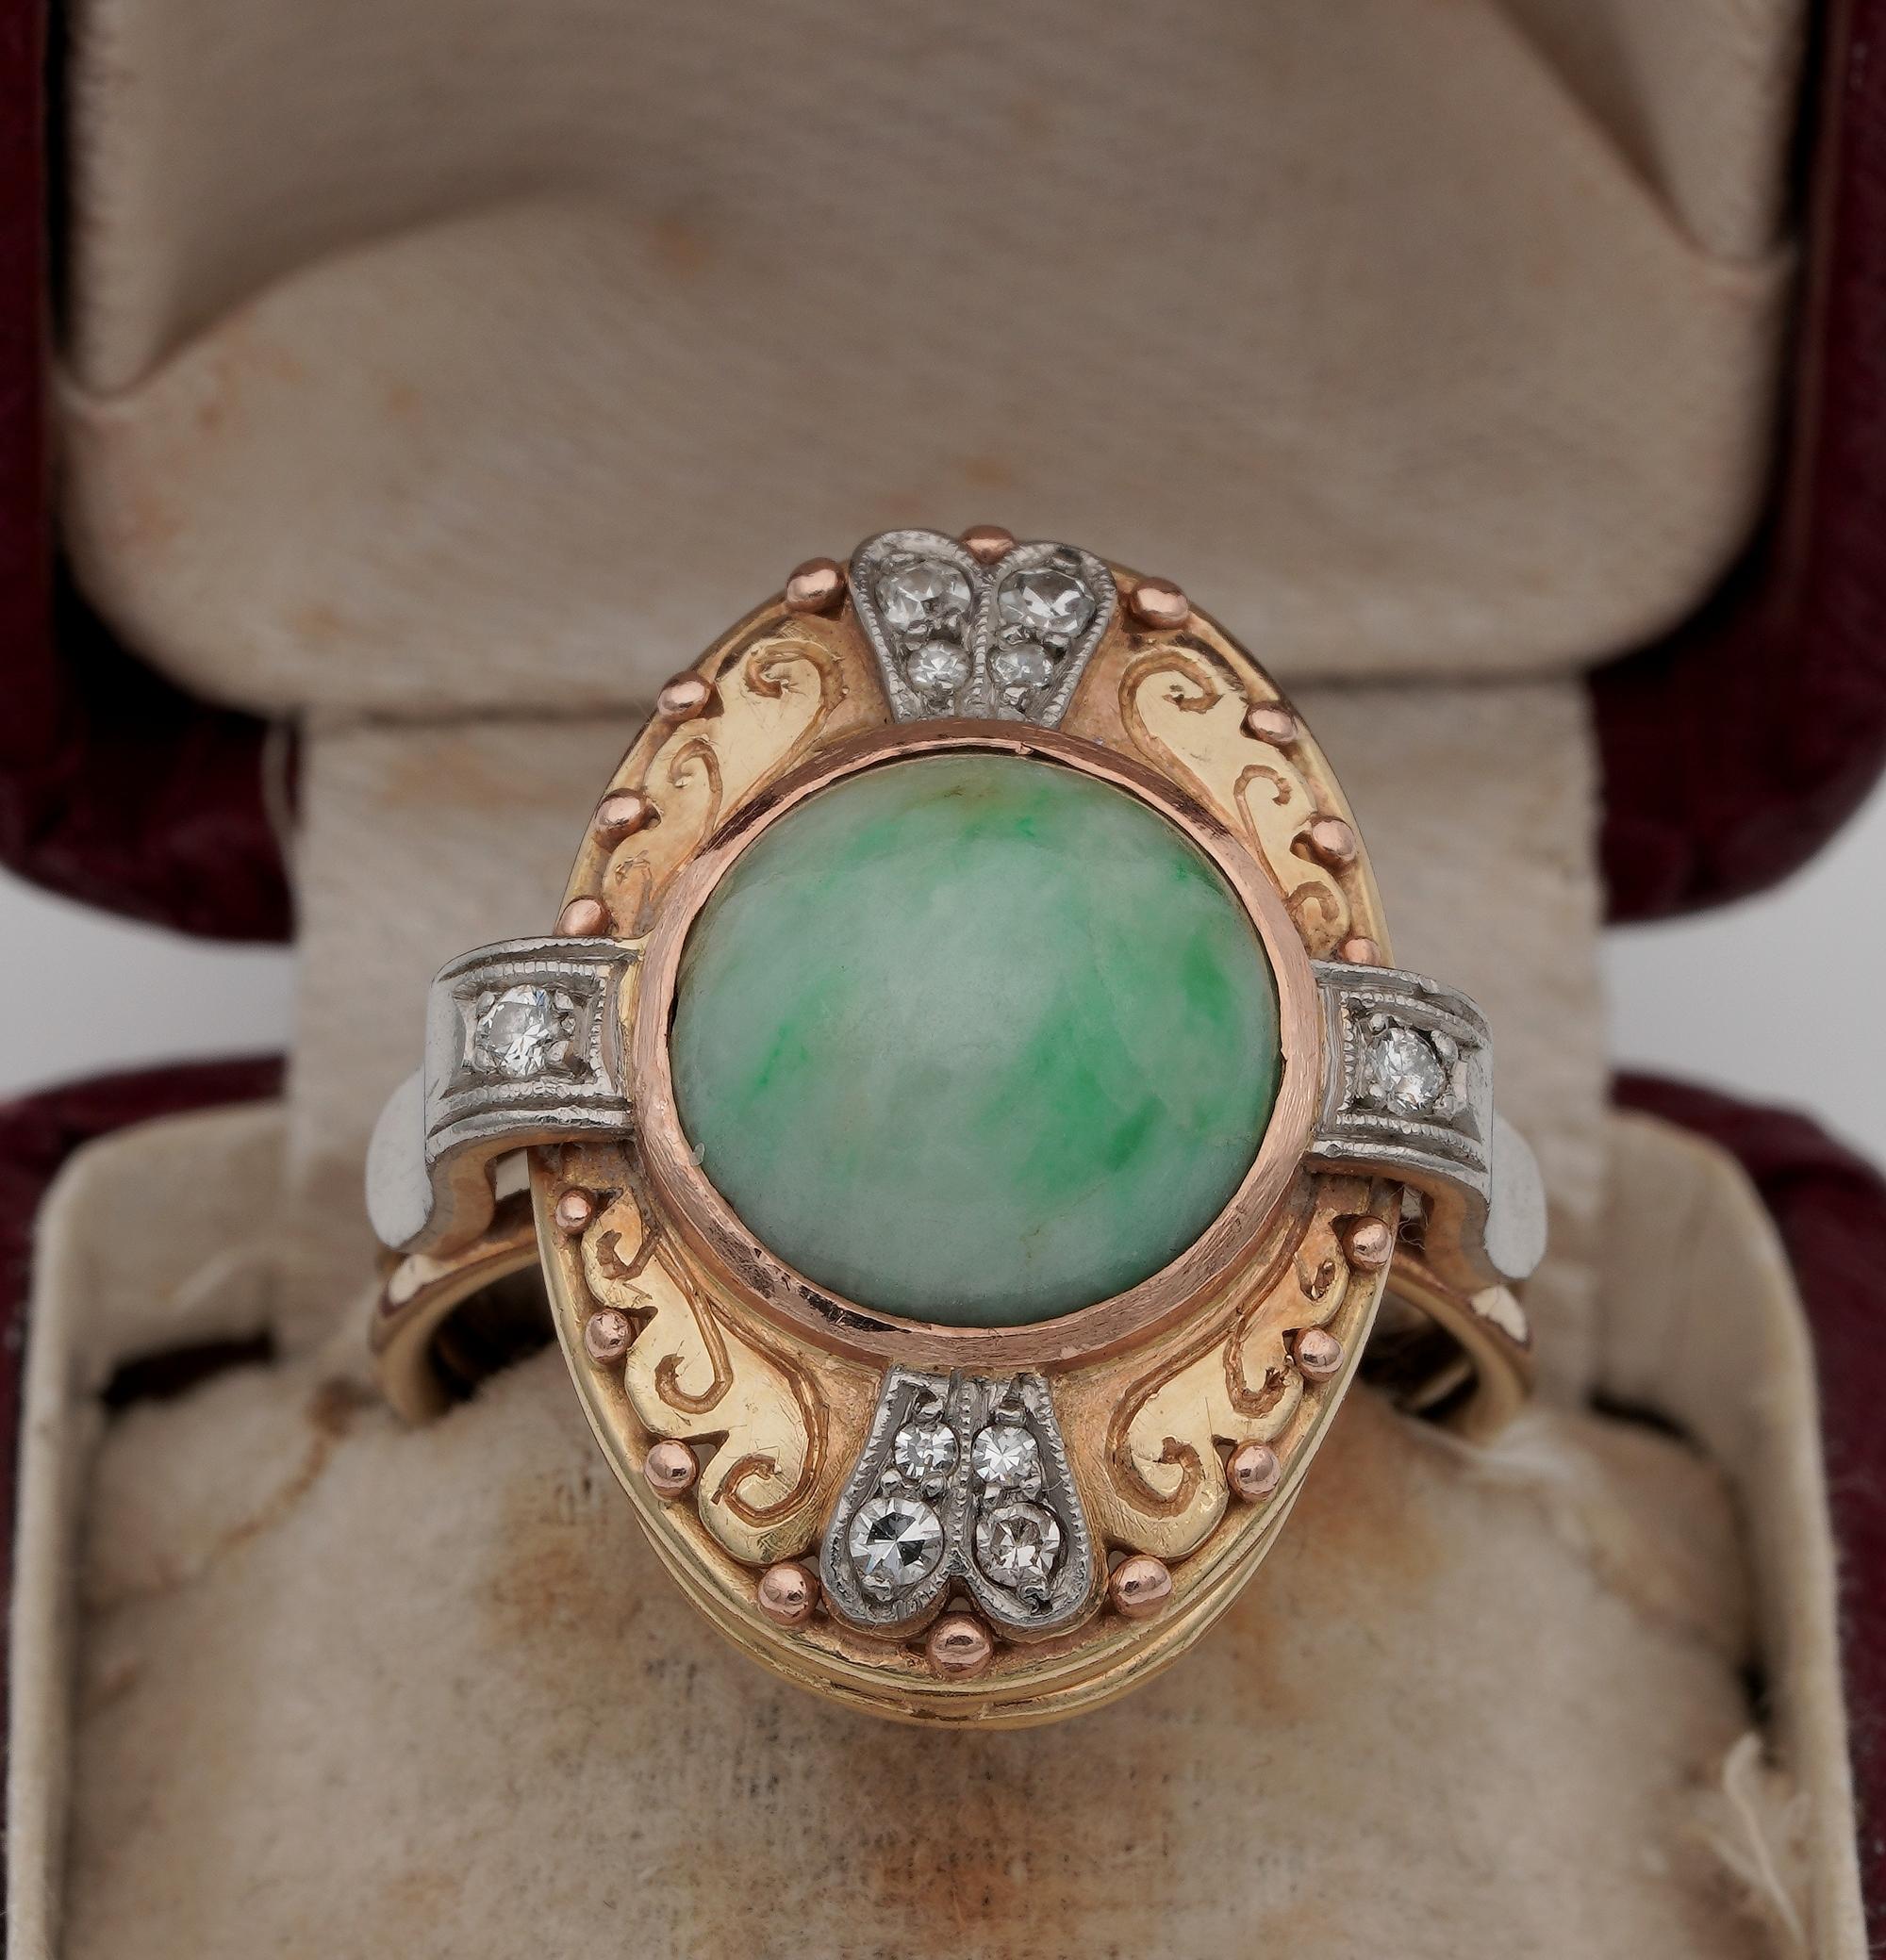 Jade Heirloom

This exquisite jade ring is a distinctive Edwardian example
Hand crafted of solid 14 KT gold (marked) with Platinum accent
The ring has a charming oval panel centrally set with a round cabochon of natural Jade of beautiful green